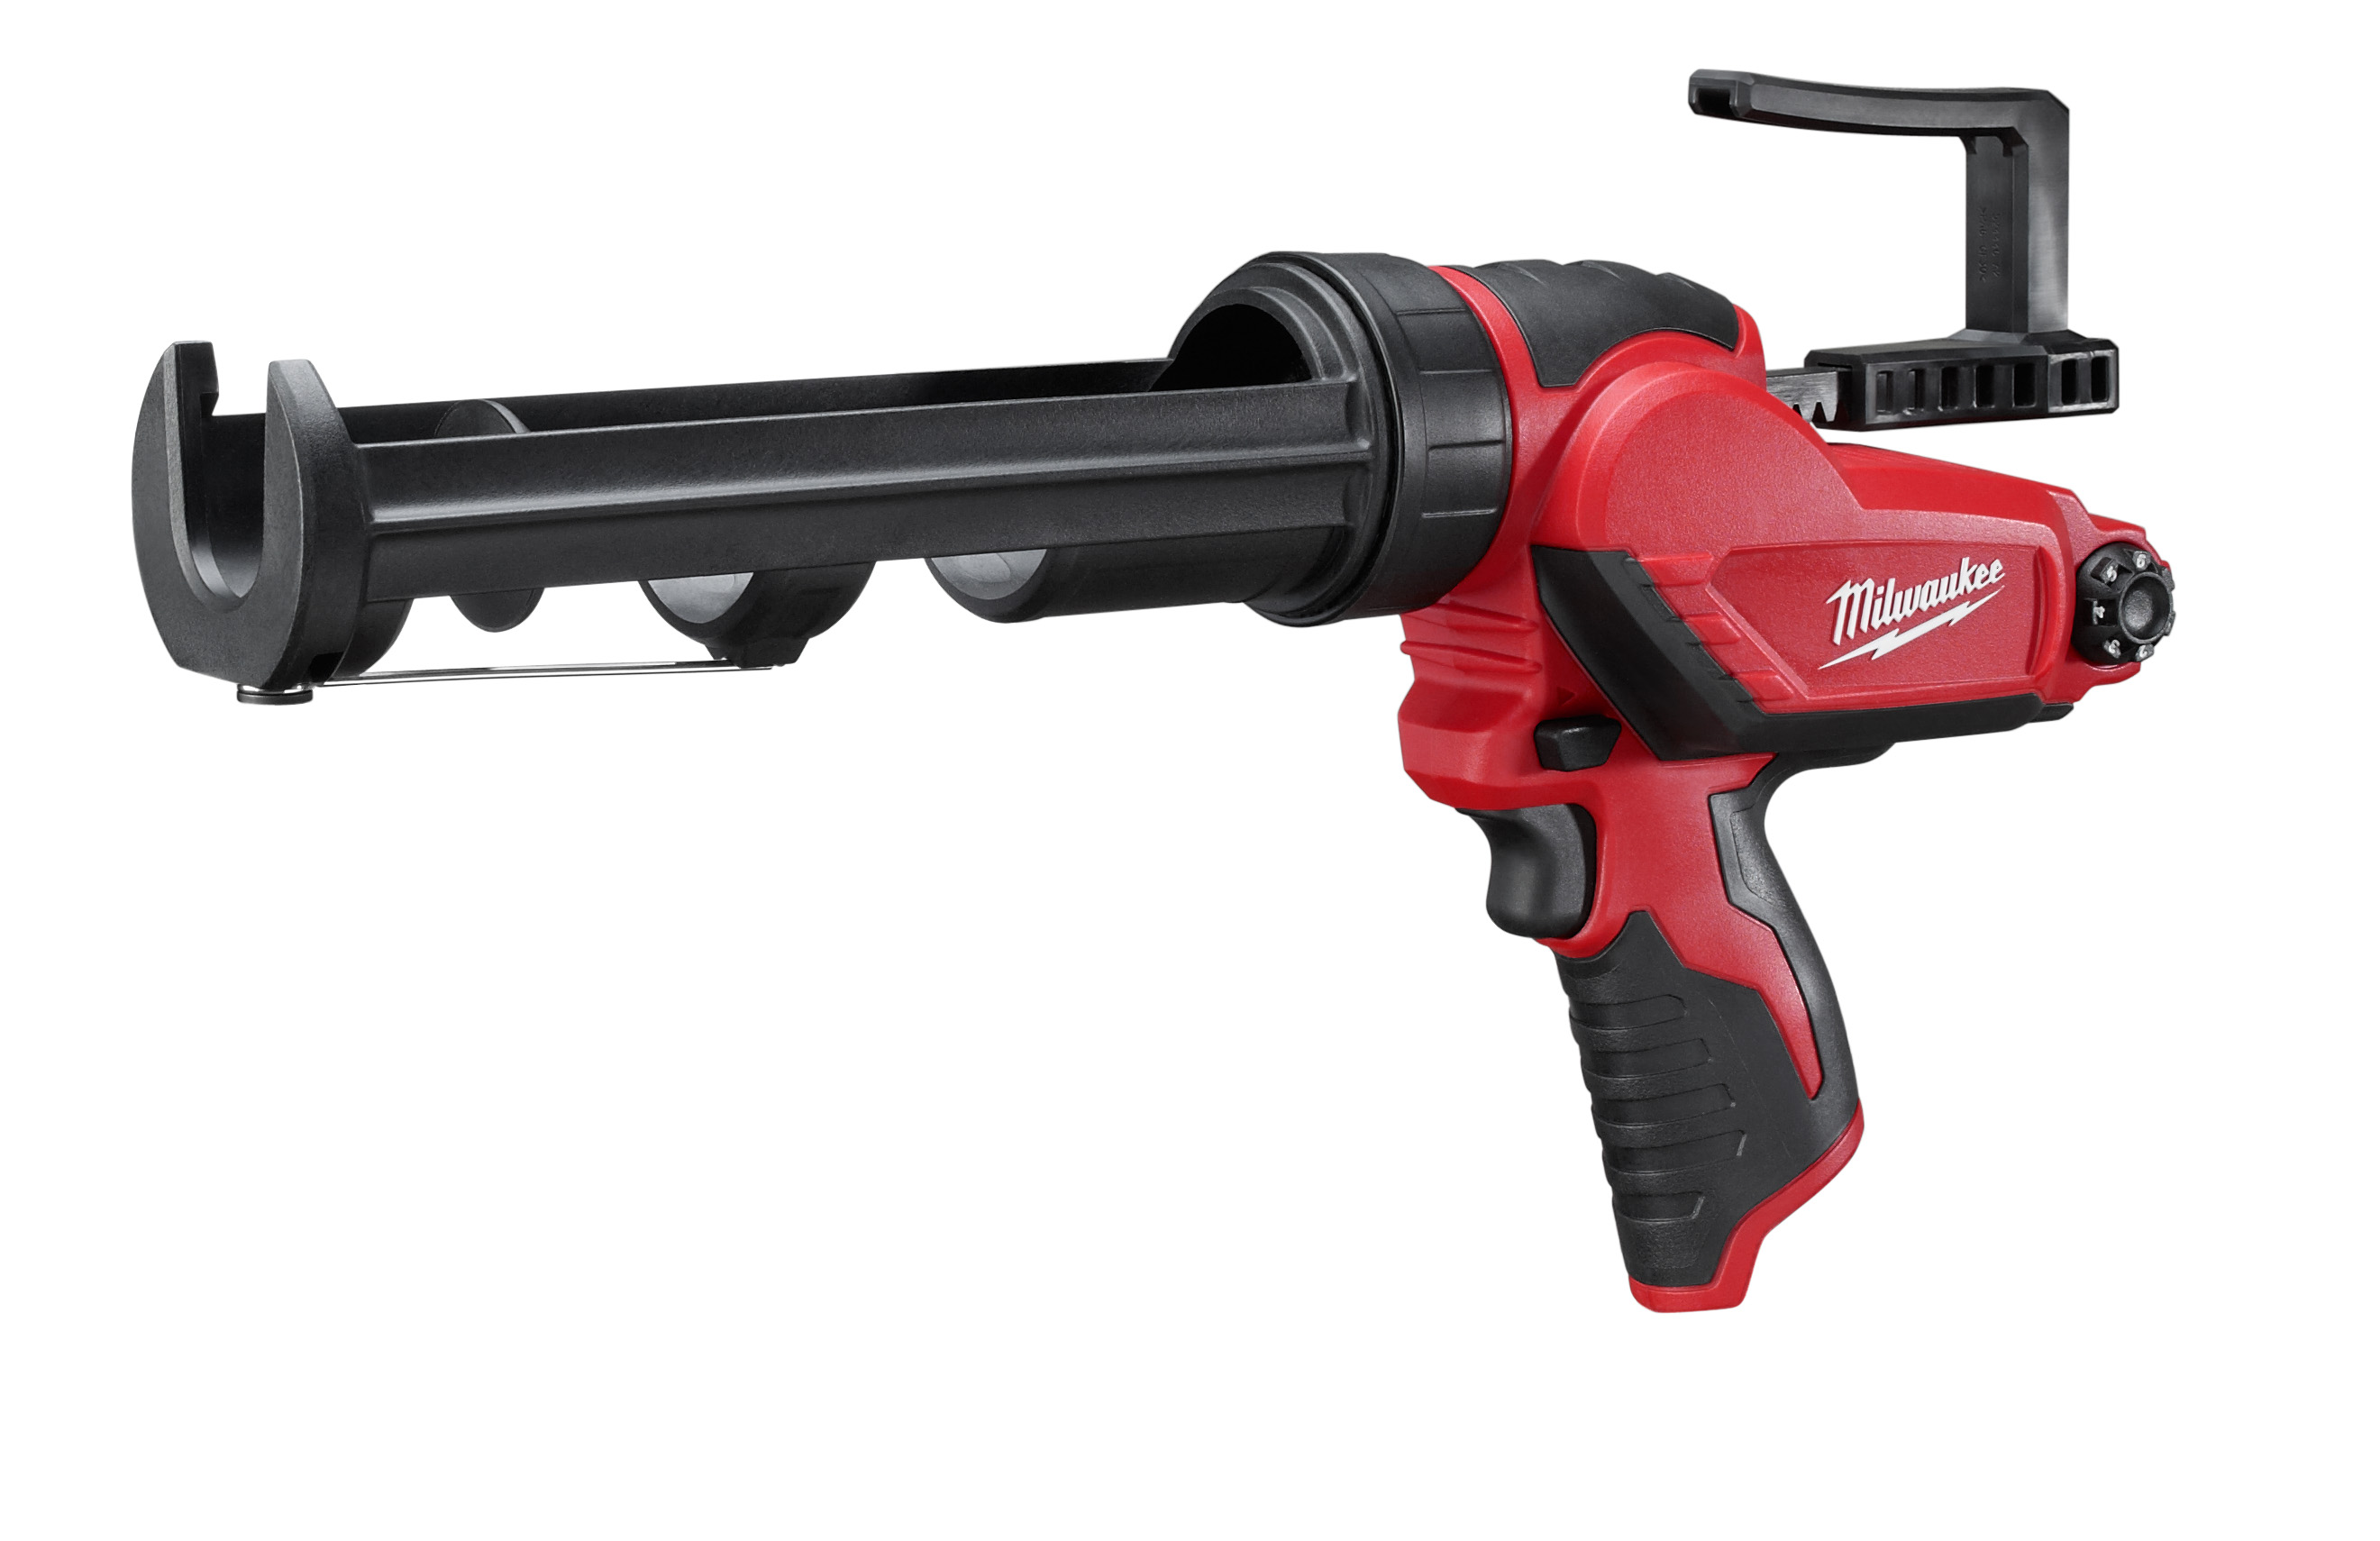 Milwaukee’s new M12 caulk and adhesive gun is the most compact and lightest weight cordless powered caulk gun on the market. Designed to be the ideal hand tool replacement, the M12 caulk gun is optimized for use with common construction sealants and adhesives. Powered by the M12 Red Lithium™ battery technology, the tool will dispense up to 150 10 oz tubes of building sealant on one charge.